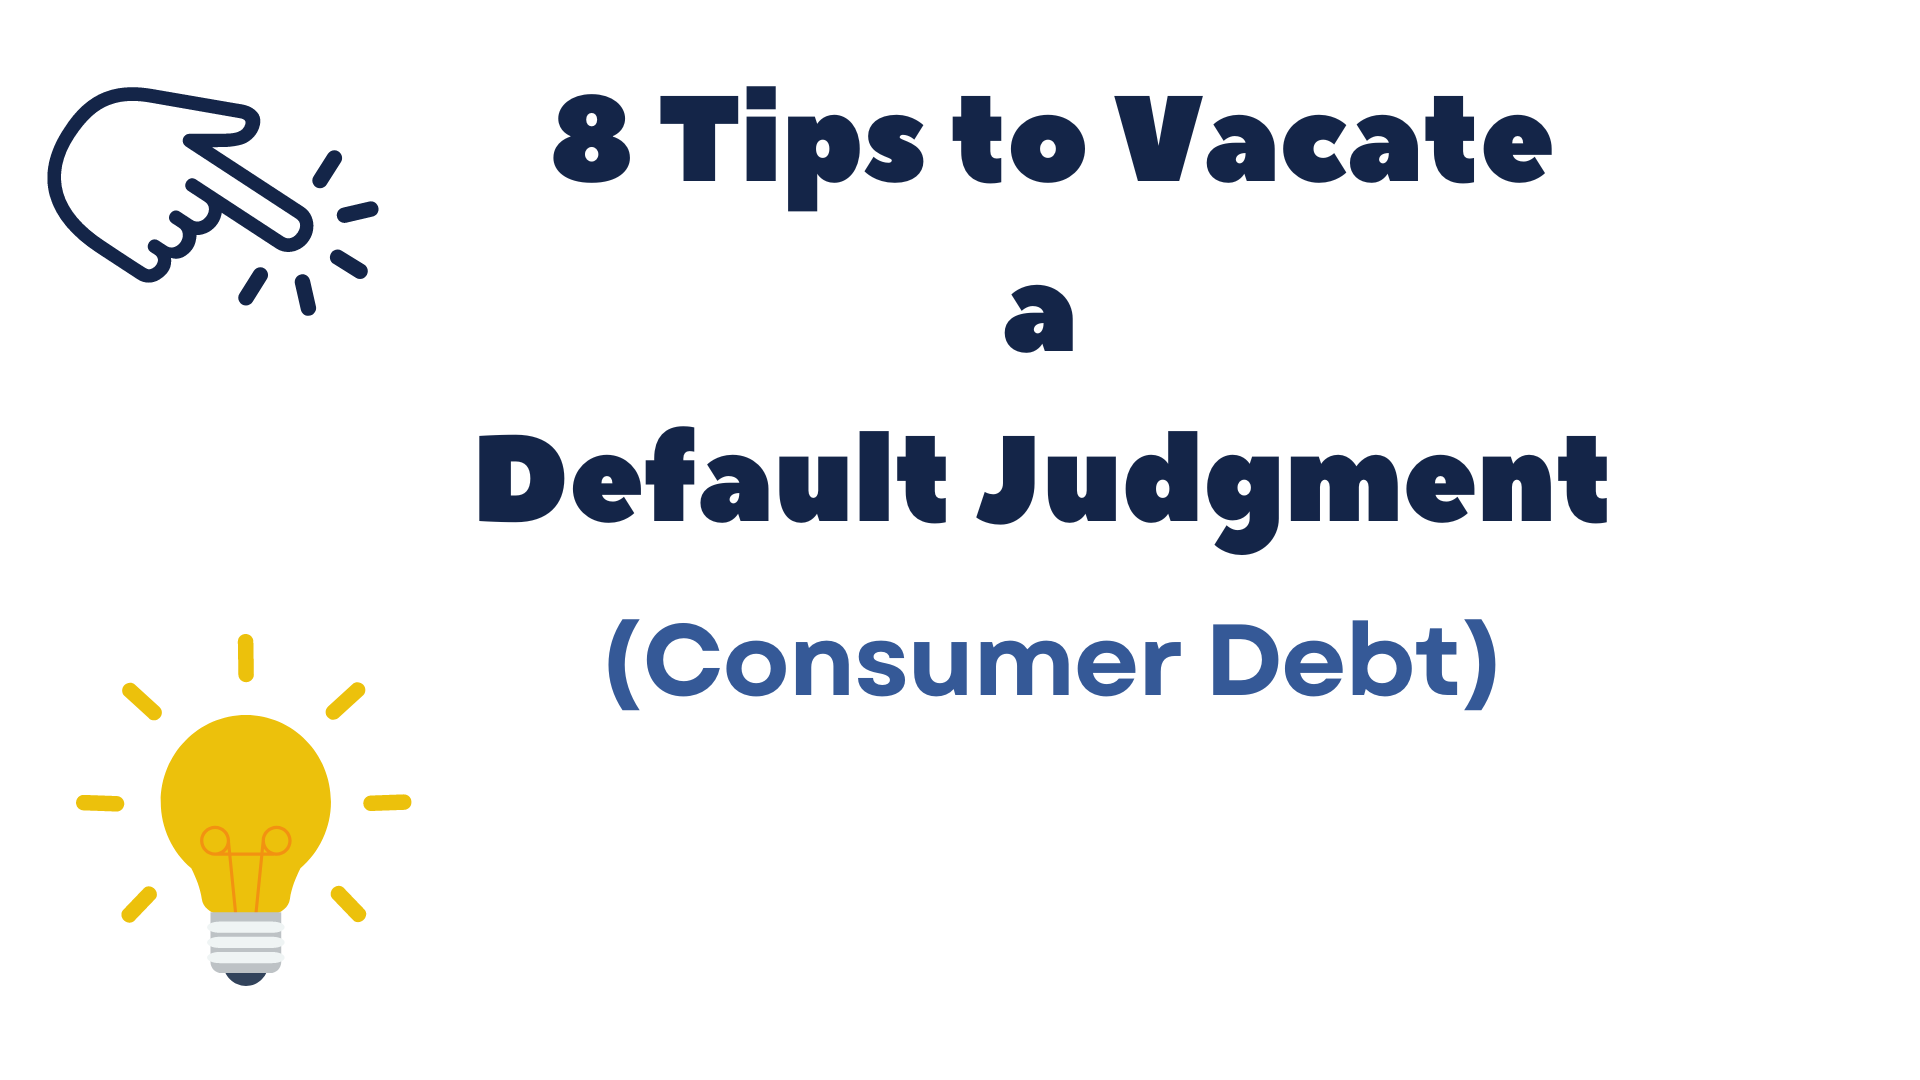 Vacate a Default Judgment by SoFi Lending Corp. by Jesse Langel